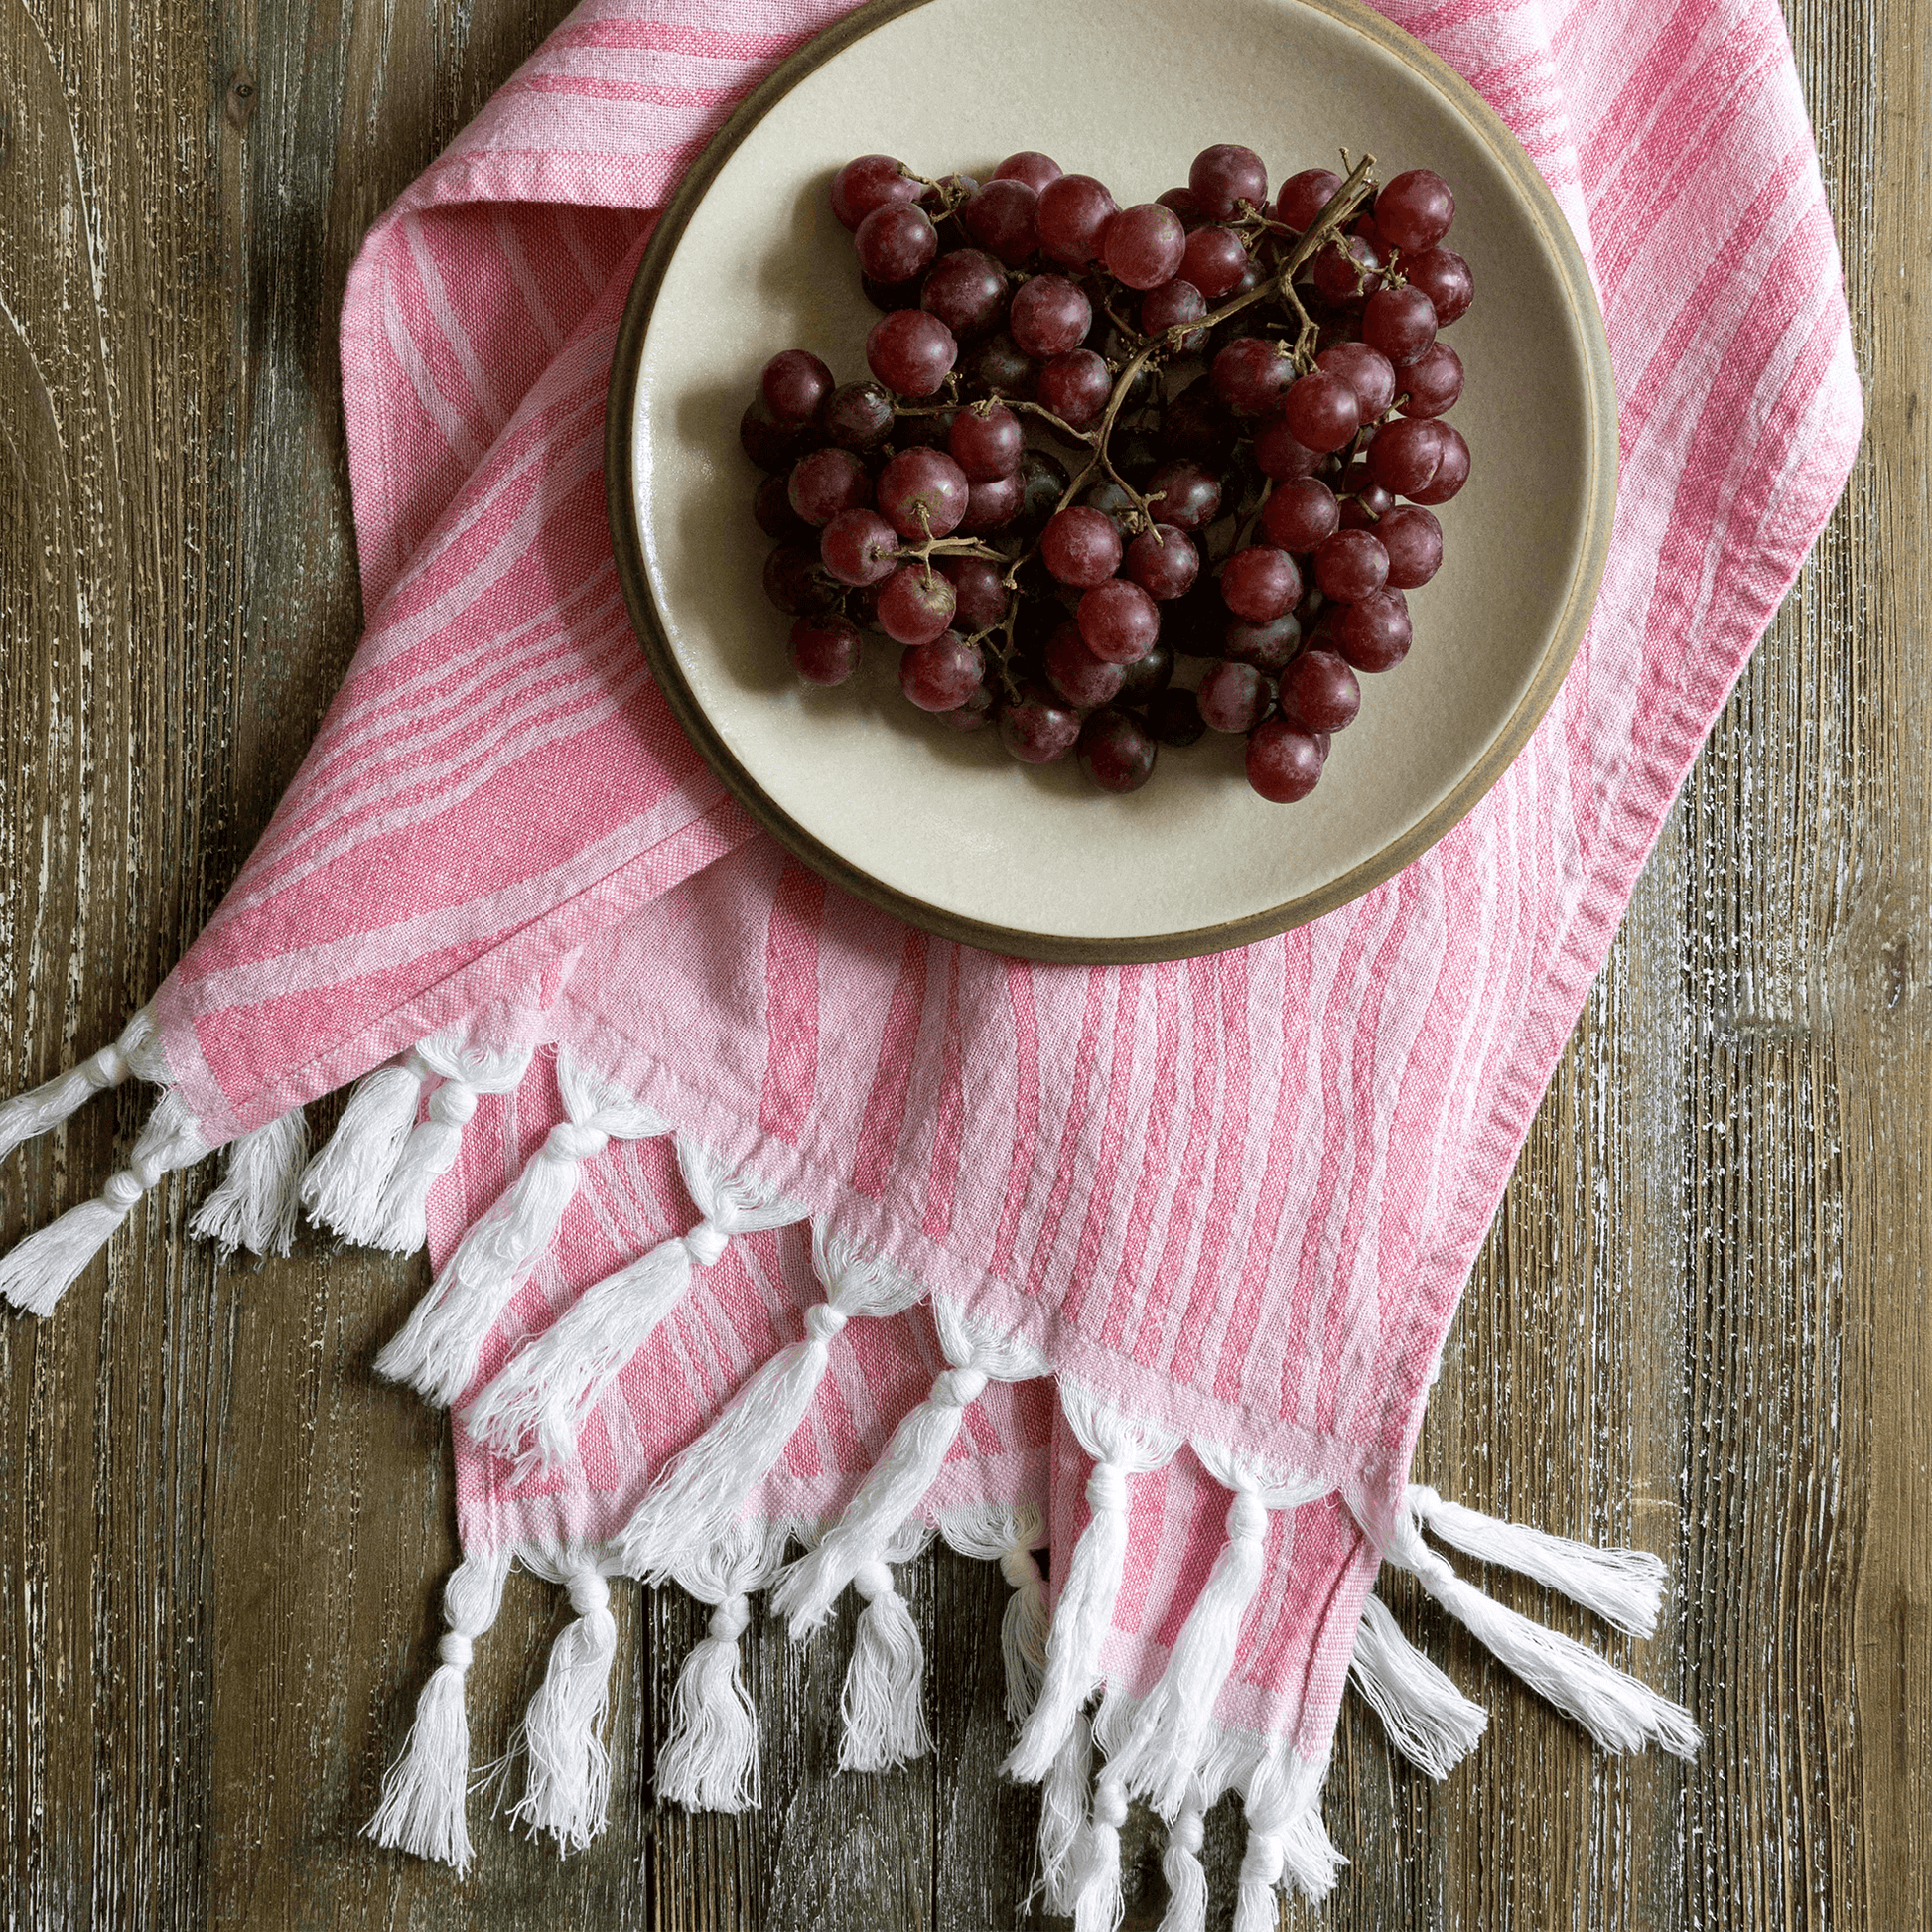 Pink Turkish hand towel with grapes